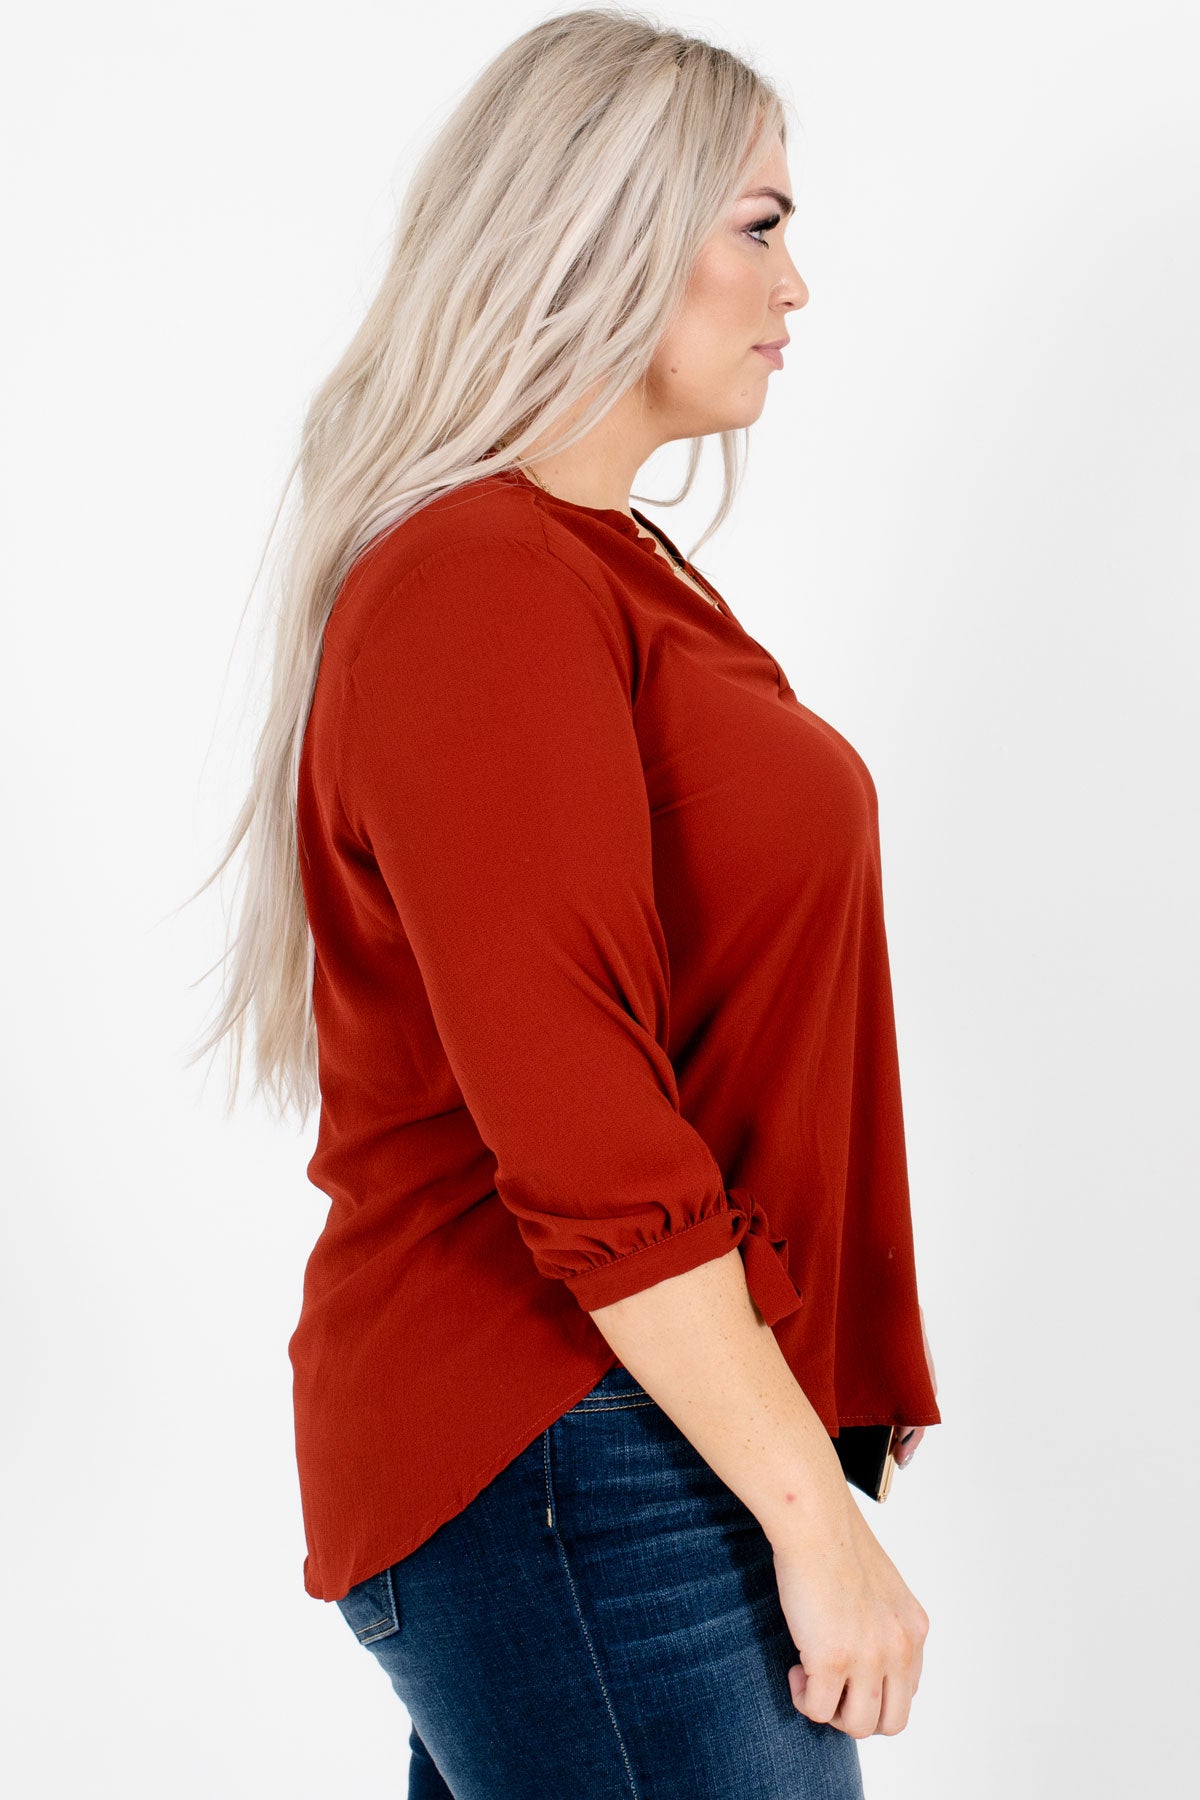 Rust Red Business Casual Boutique Blouses for Women